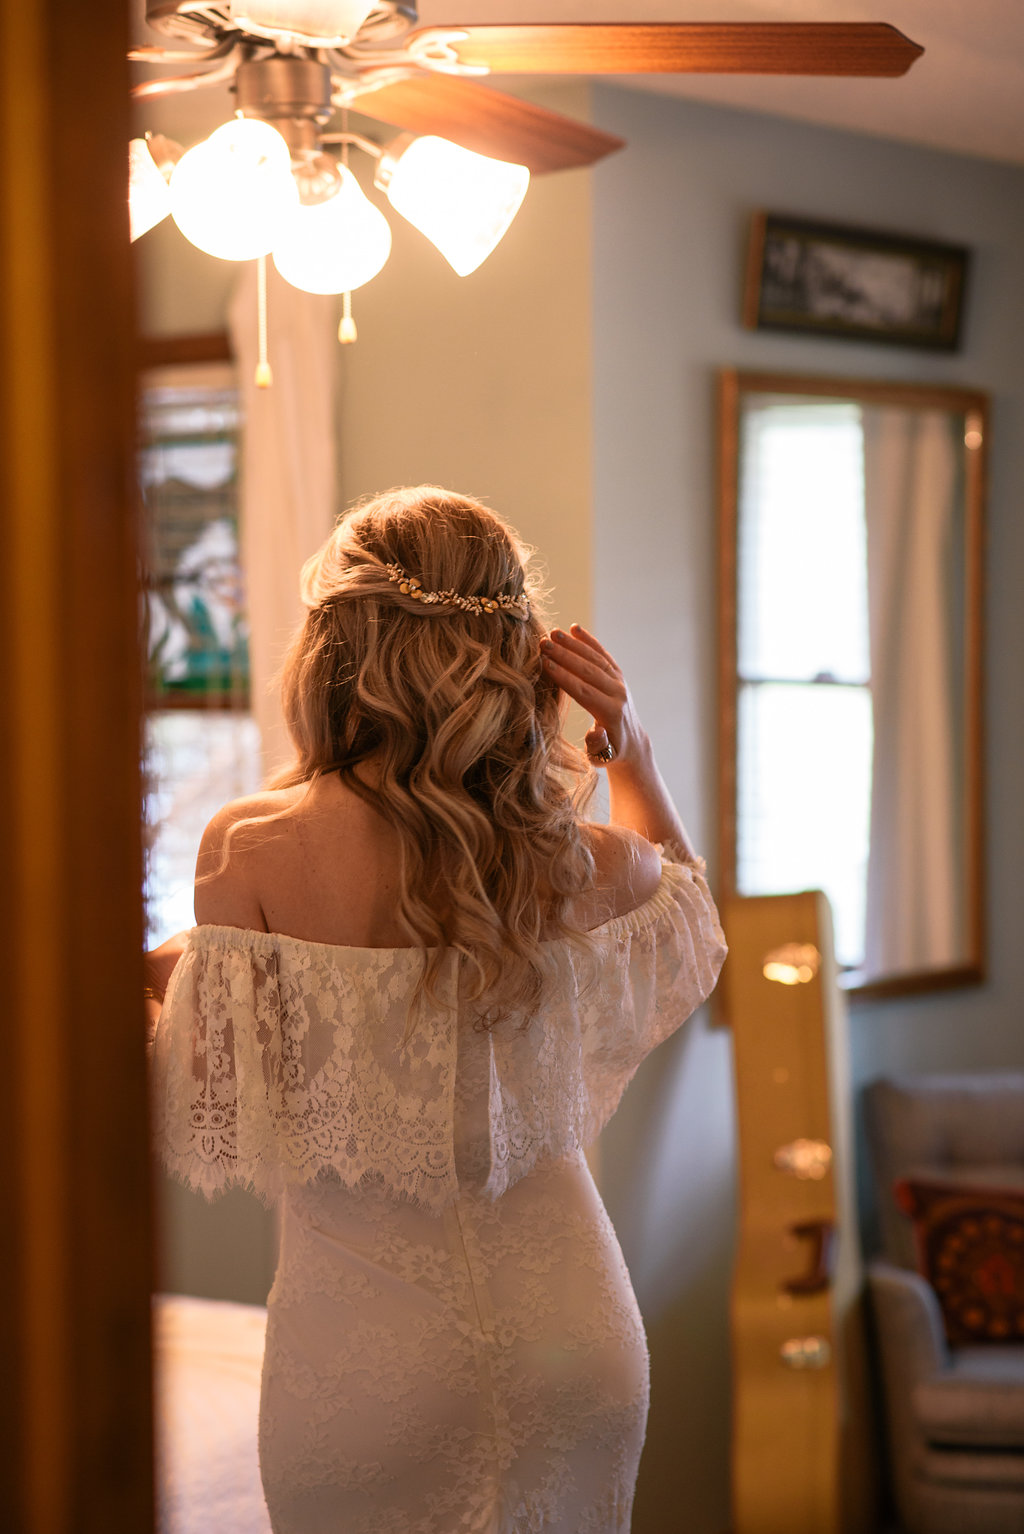 ivory-and-beau-bridal-boutique-meg-hill-photography-laurence-daughters-of-simone-boho-wedding-gown-douglas-ga-wedding-6.jpg